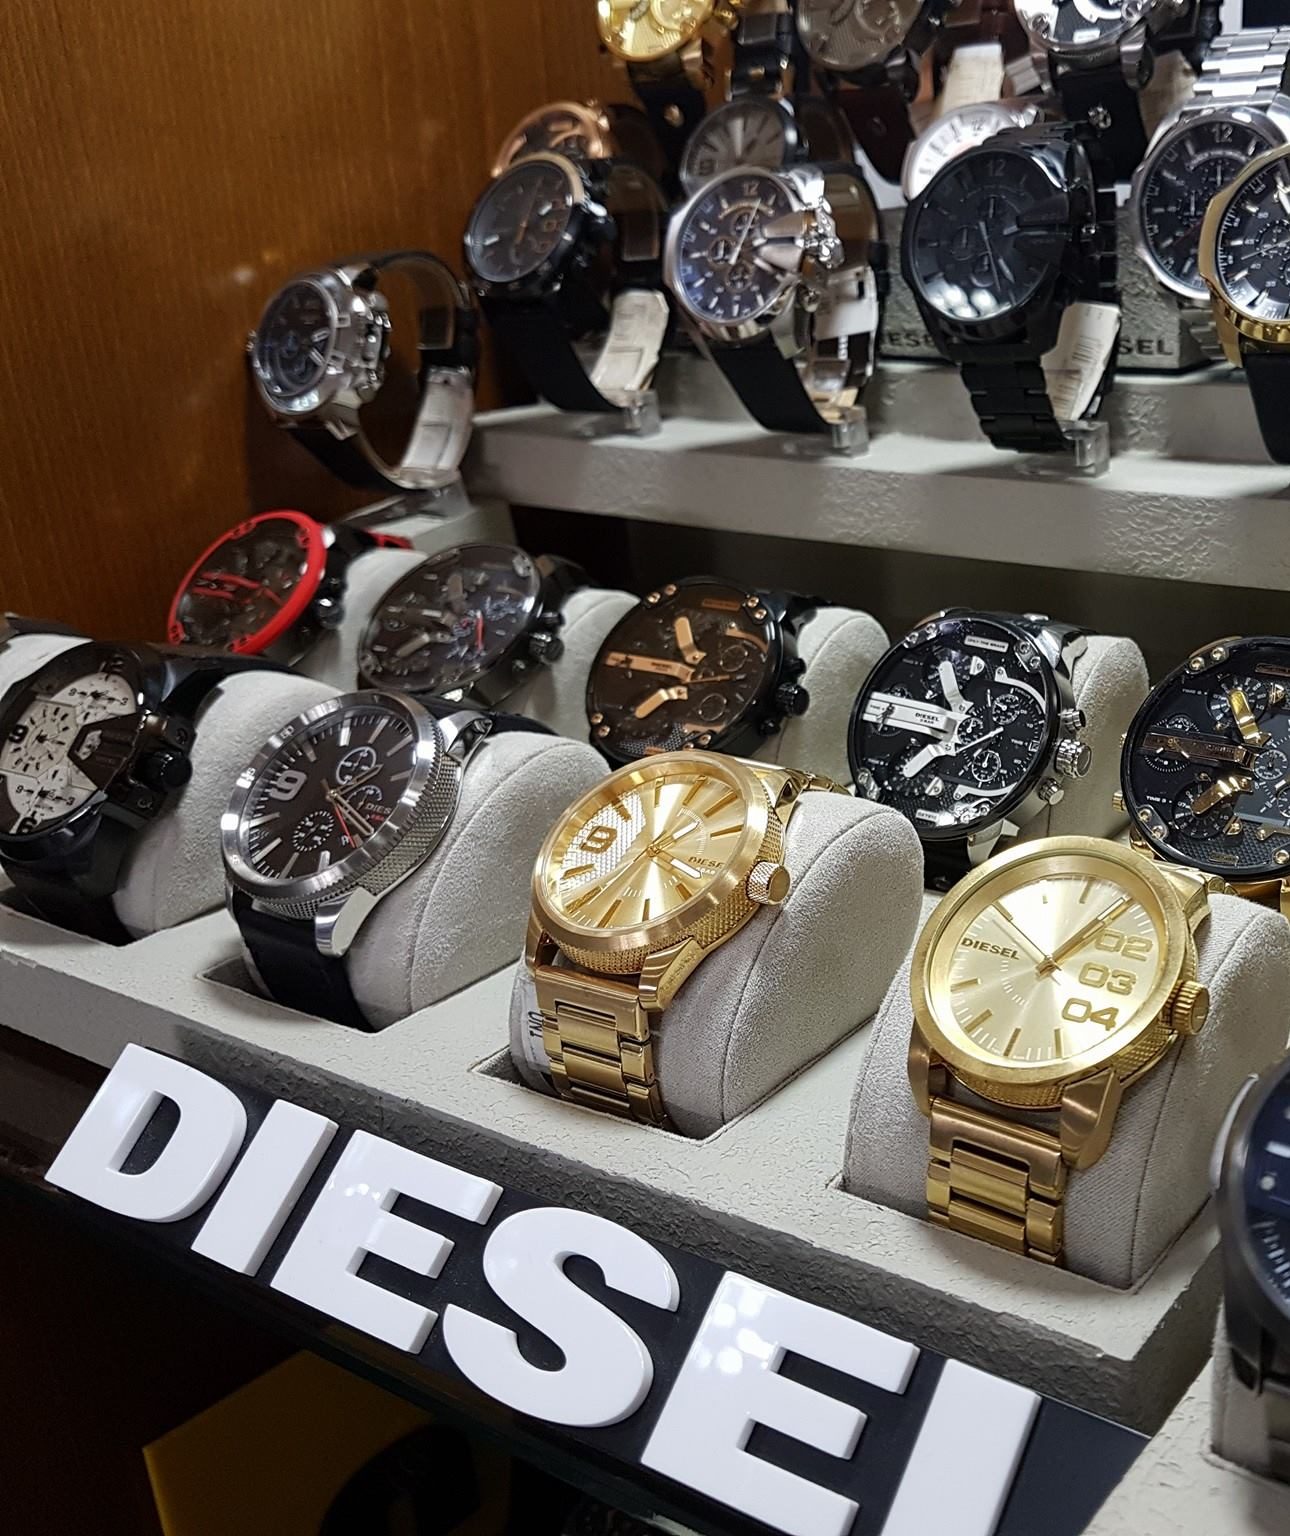 5 Best Diesel Watches For Me